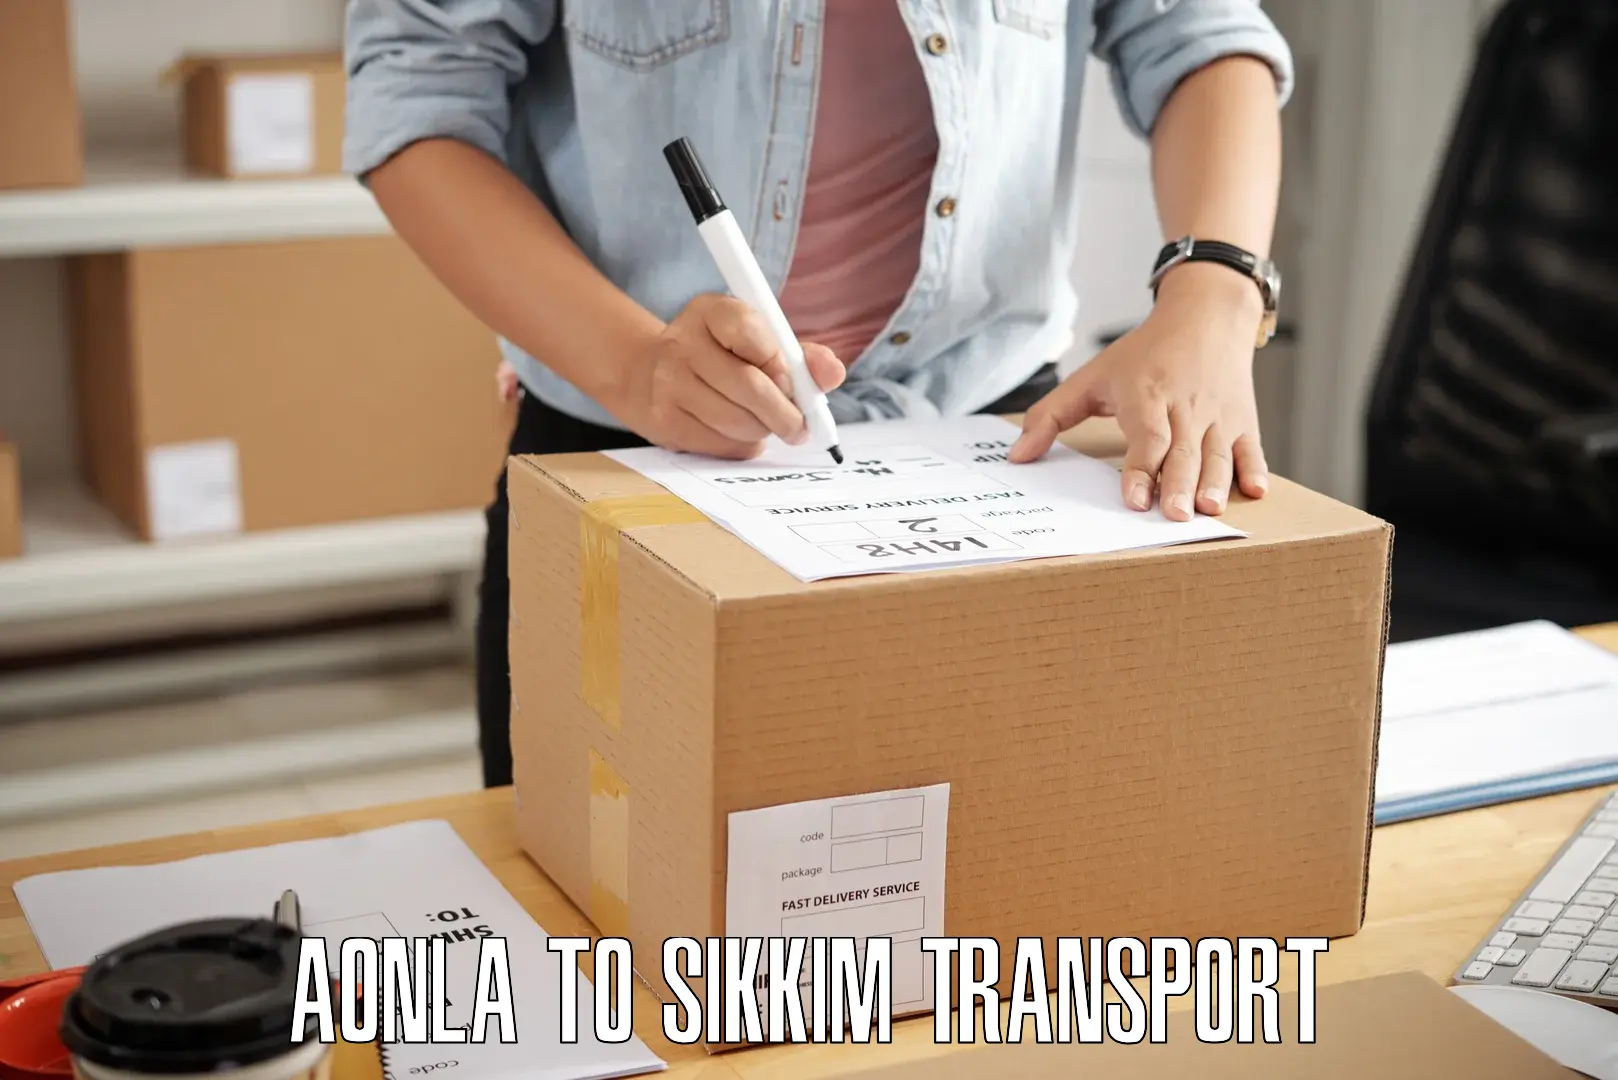 Shipping services Aonla to Pelling